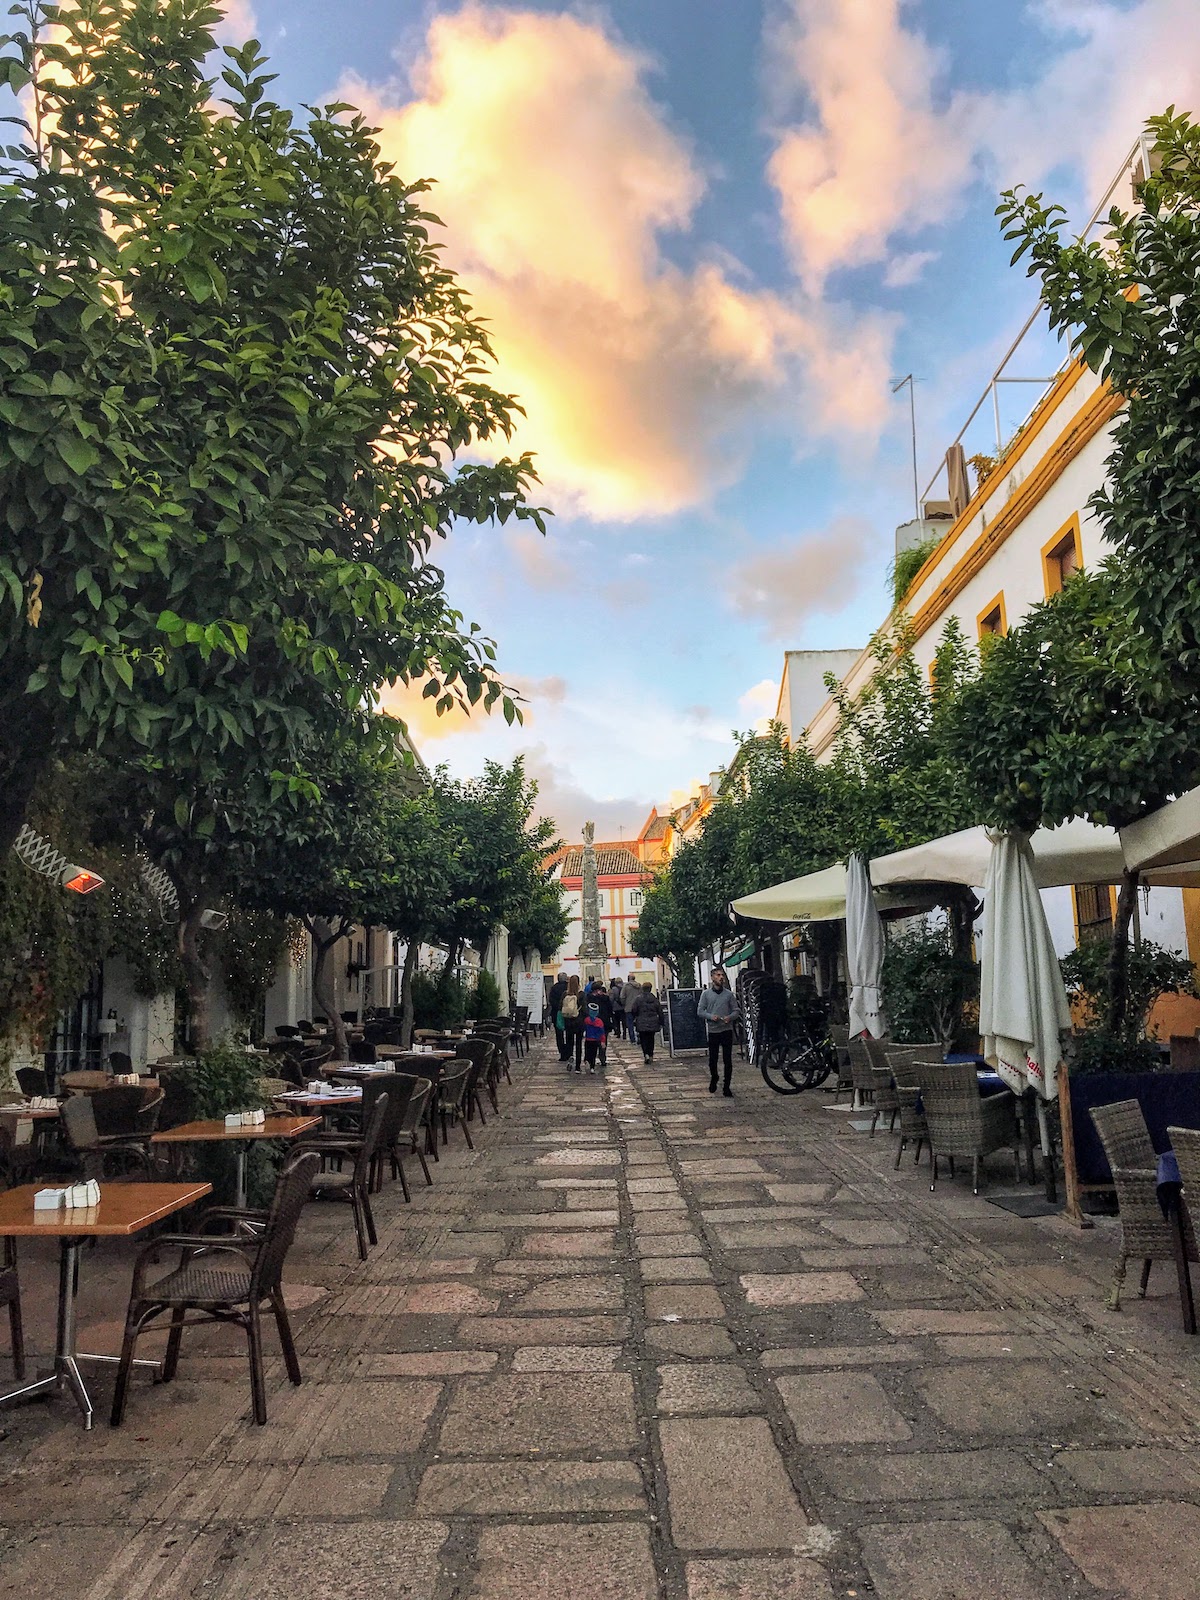 Cobblestoned plaza at sunset lined with restaurant tables on either side.